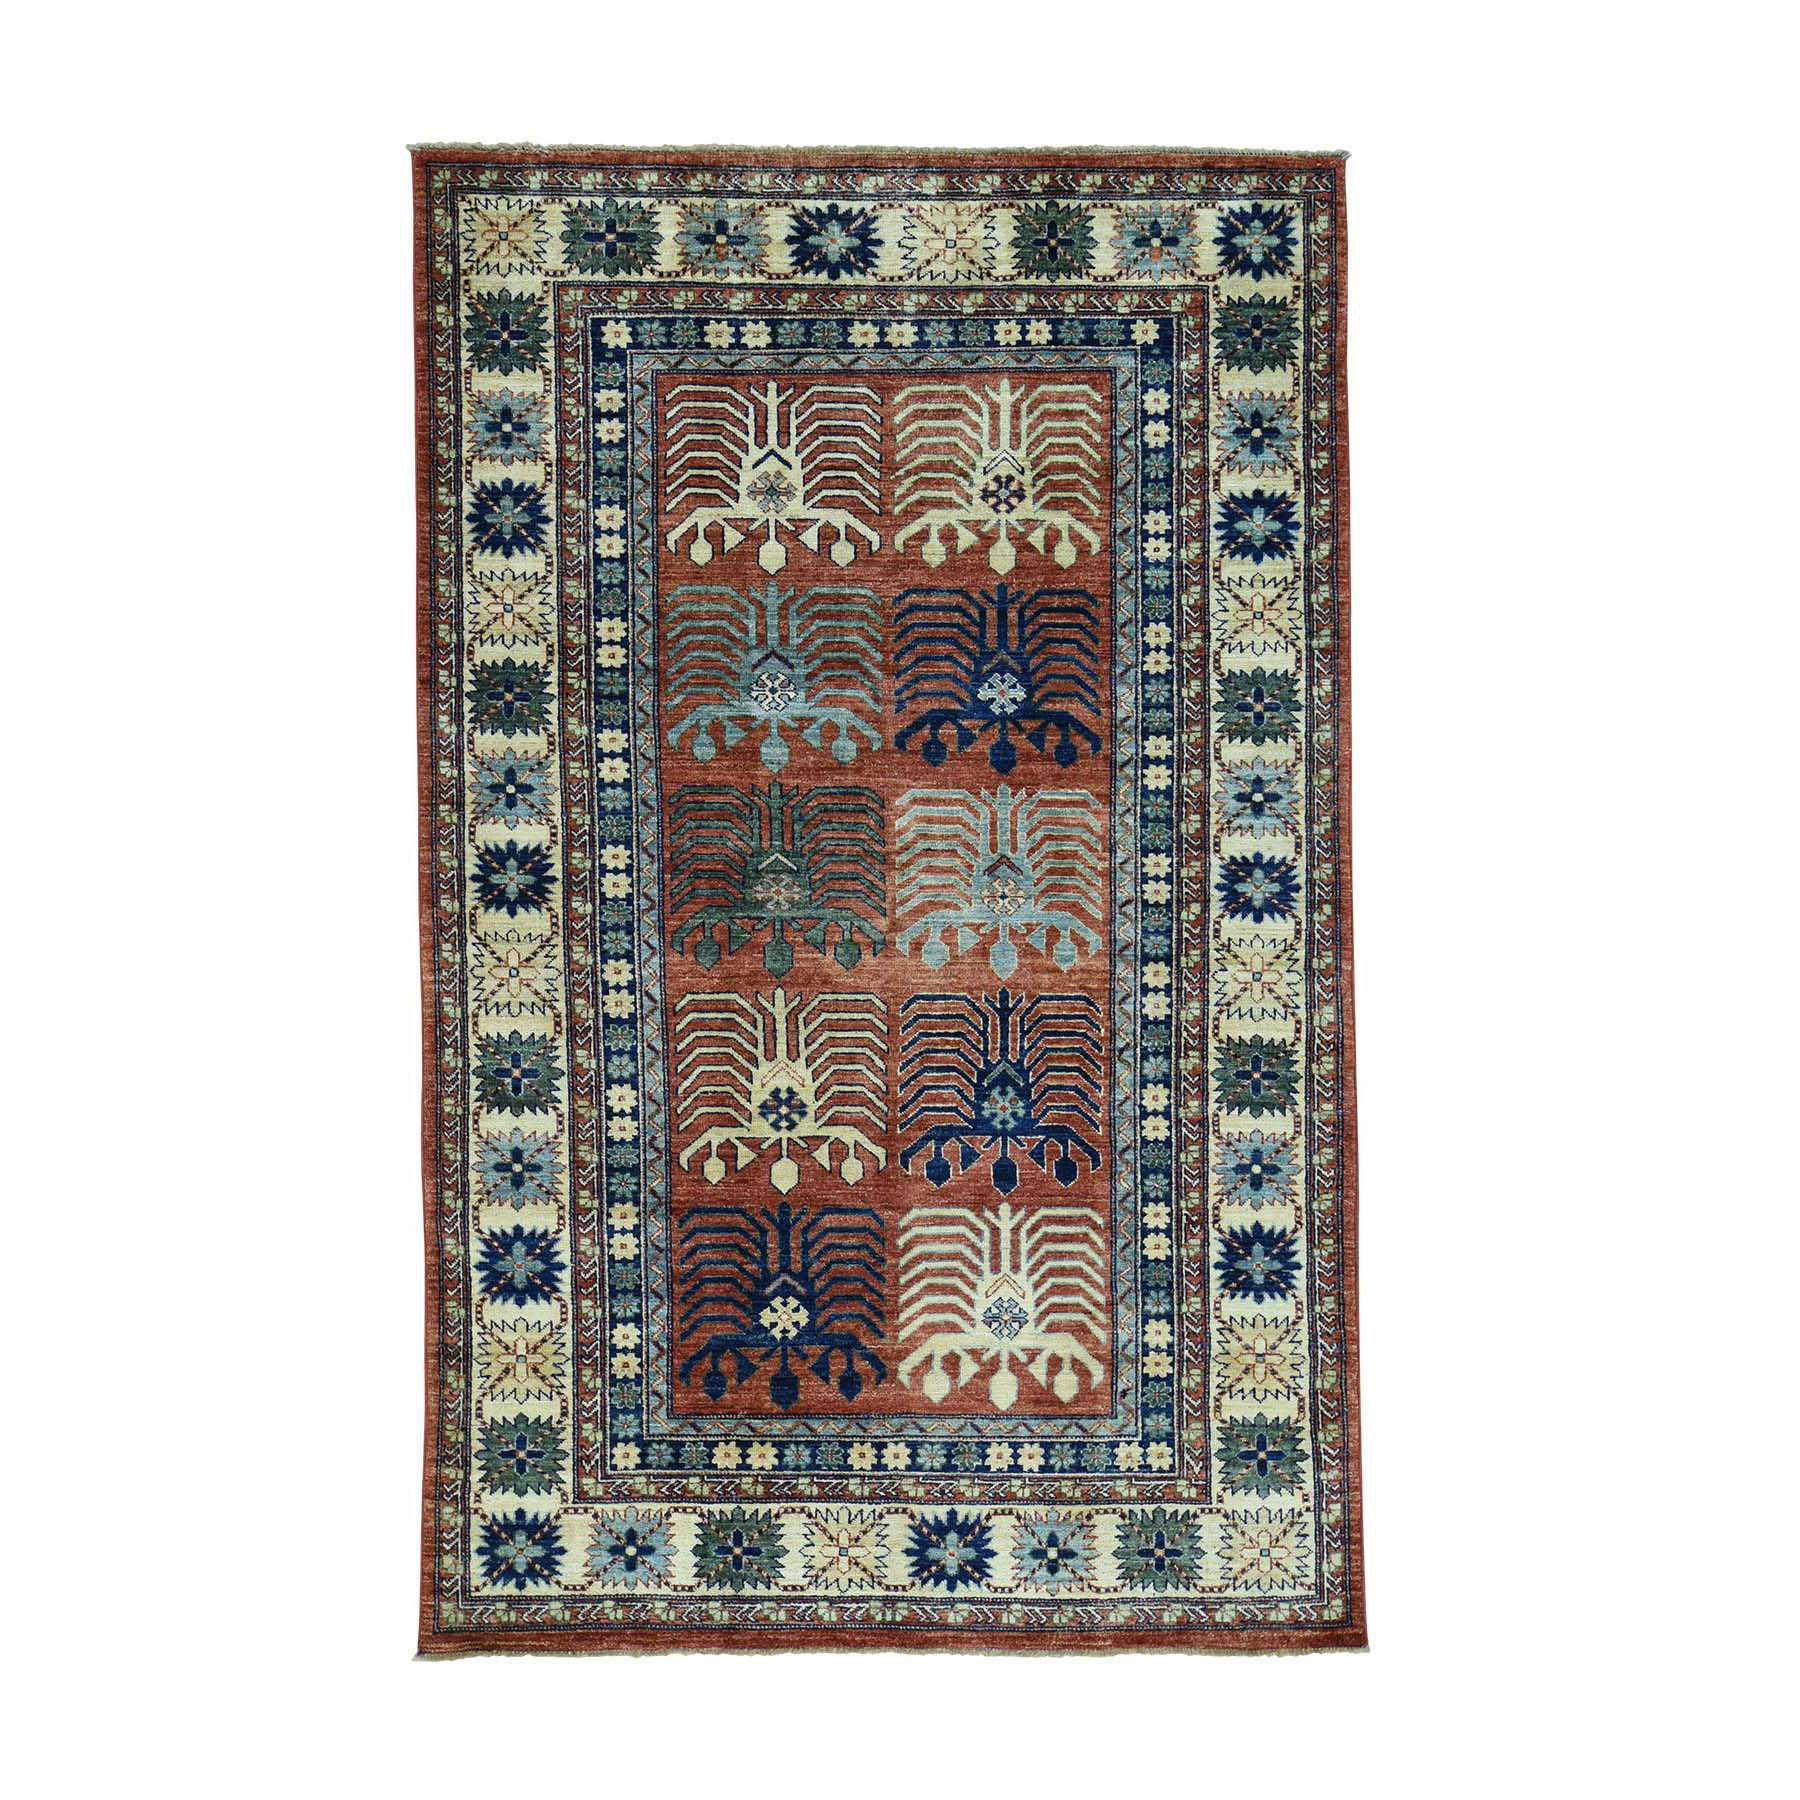 CLEARANCE Tibetan hand woven knotted Wool and Silk oriental rugs